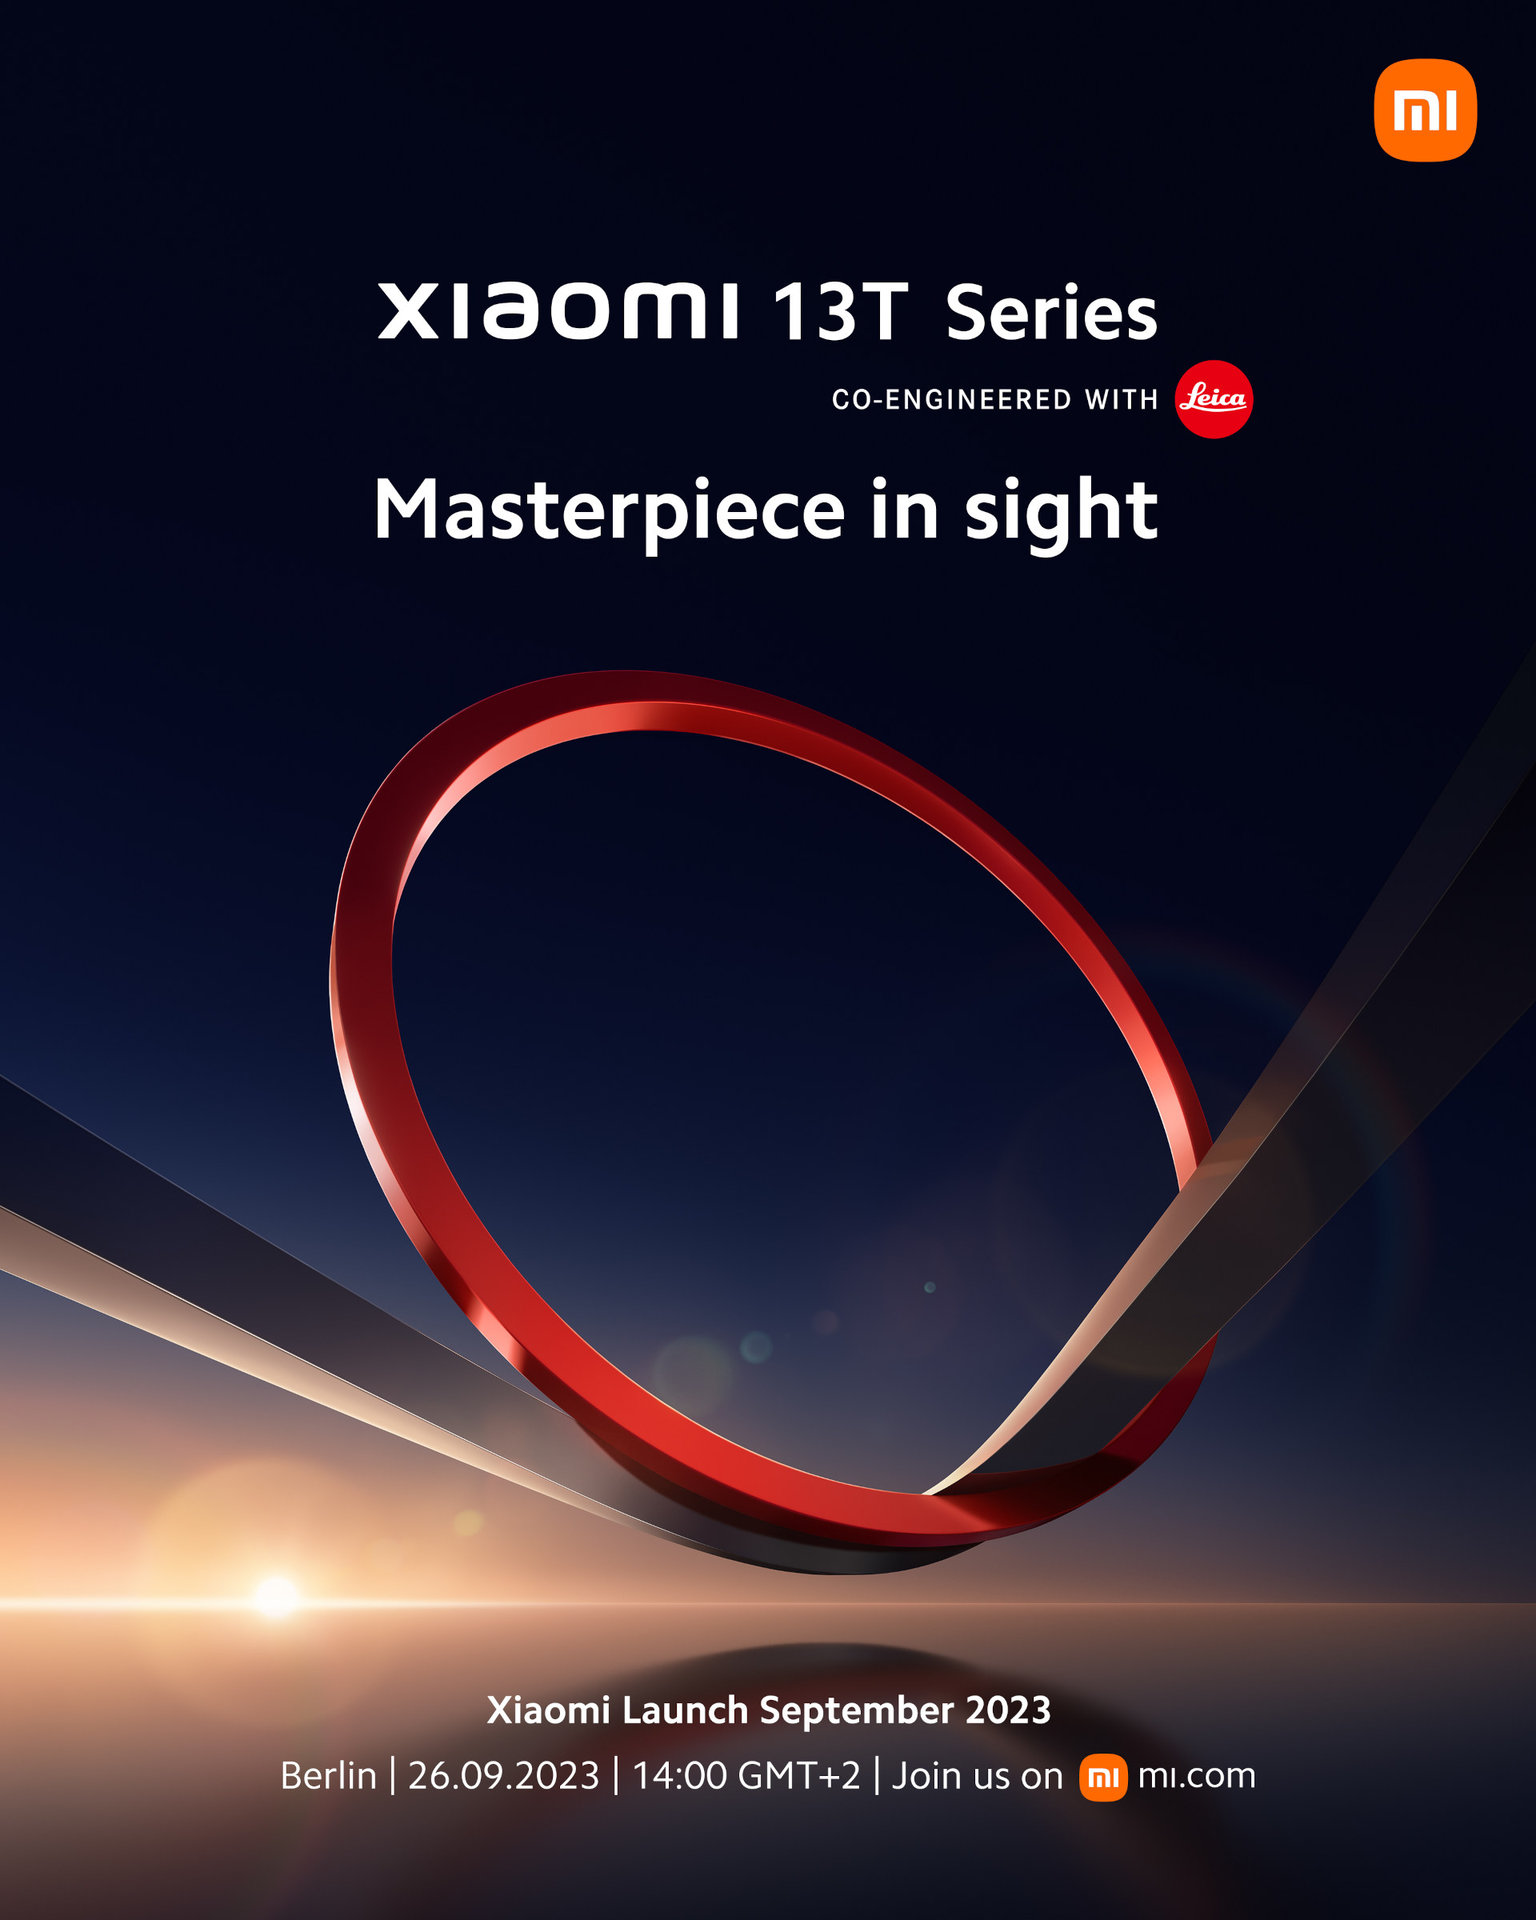 Xiaomi 13T series global launch poster resized